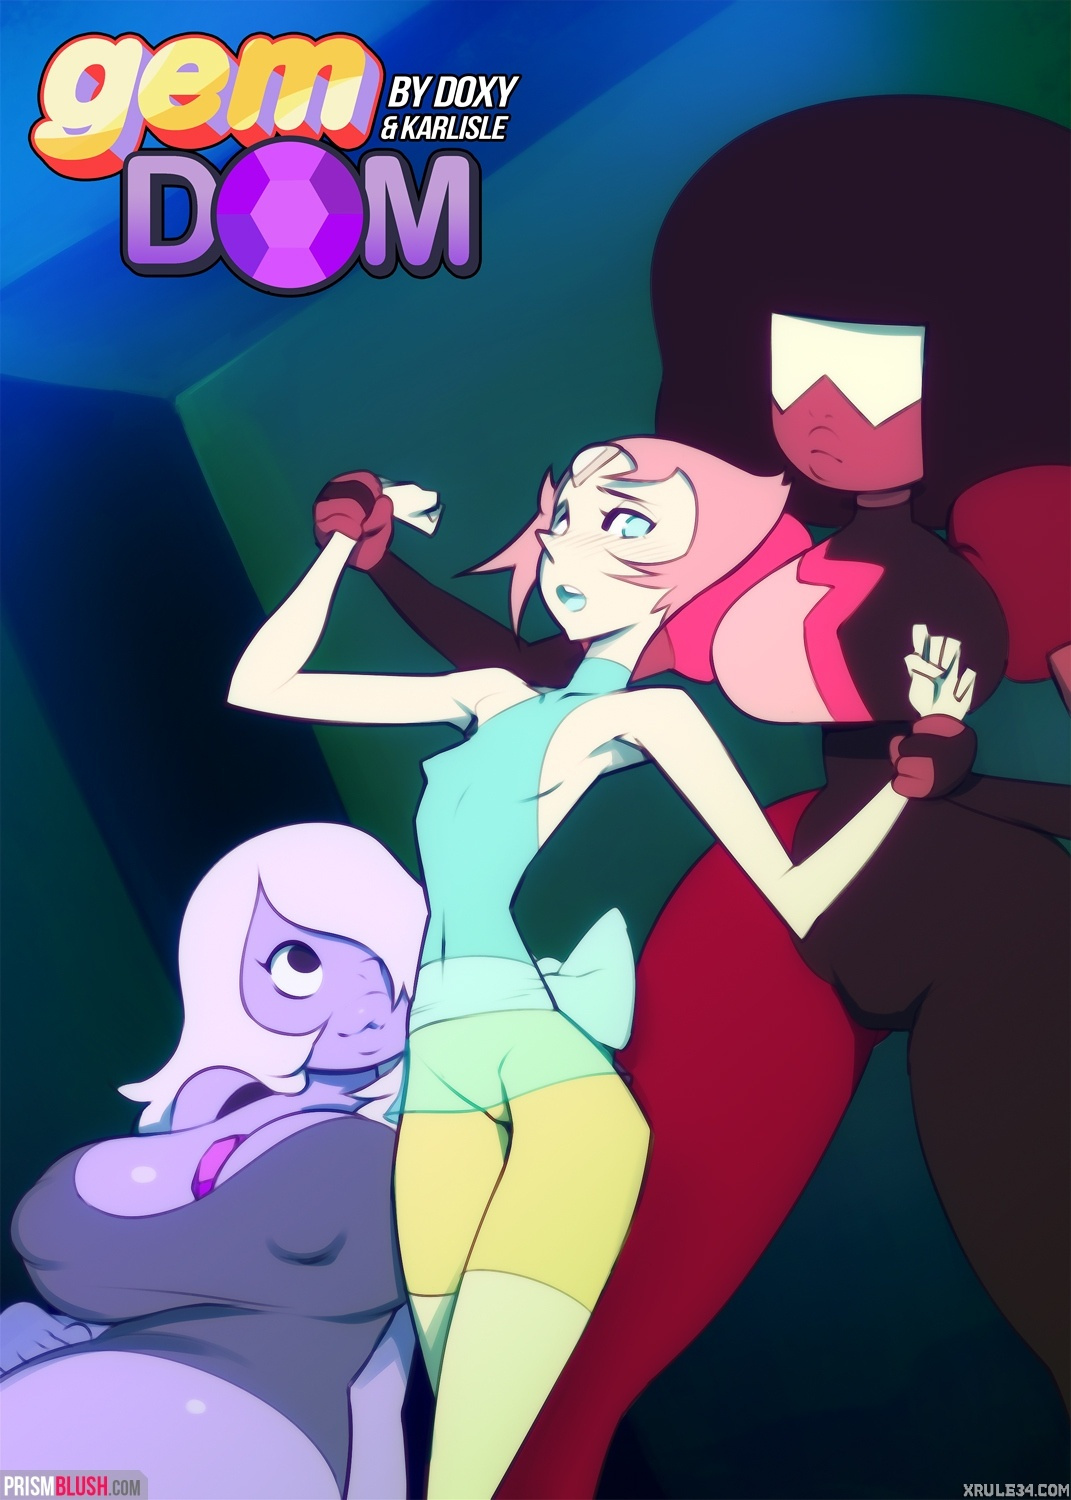 Dino recomended CRYSTAL GEMS GROW.